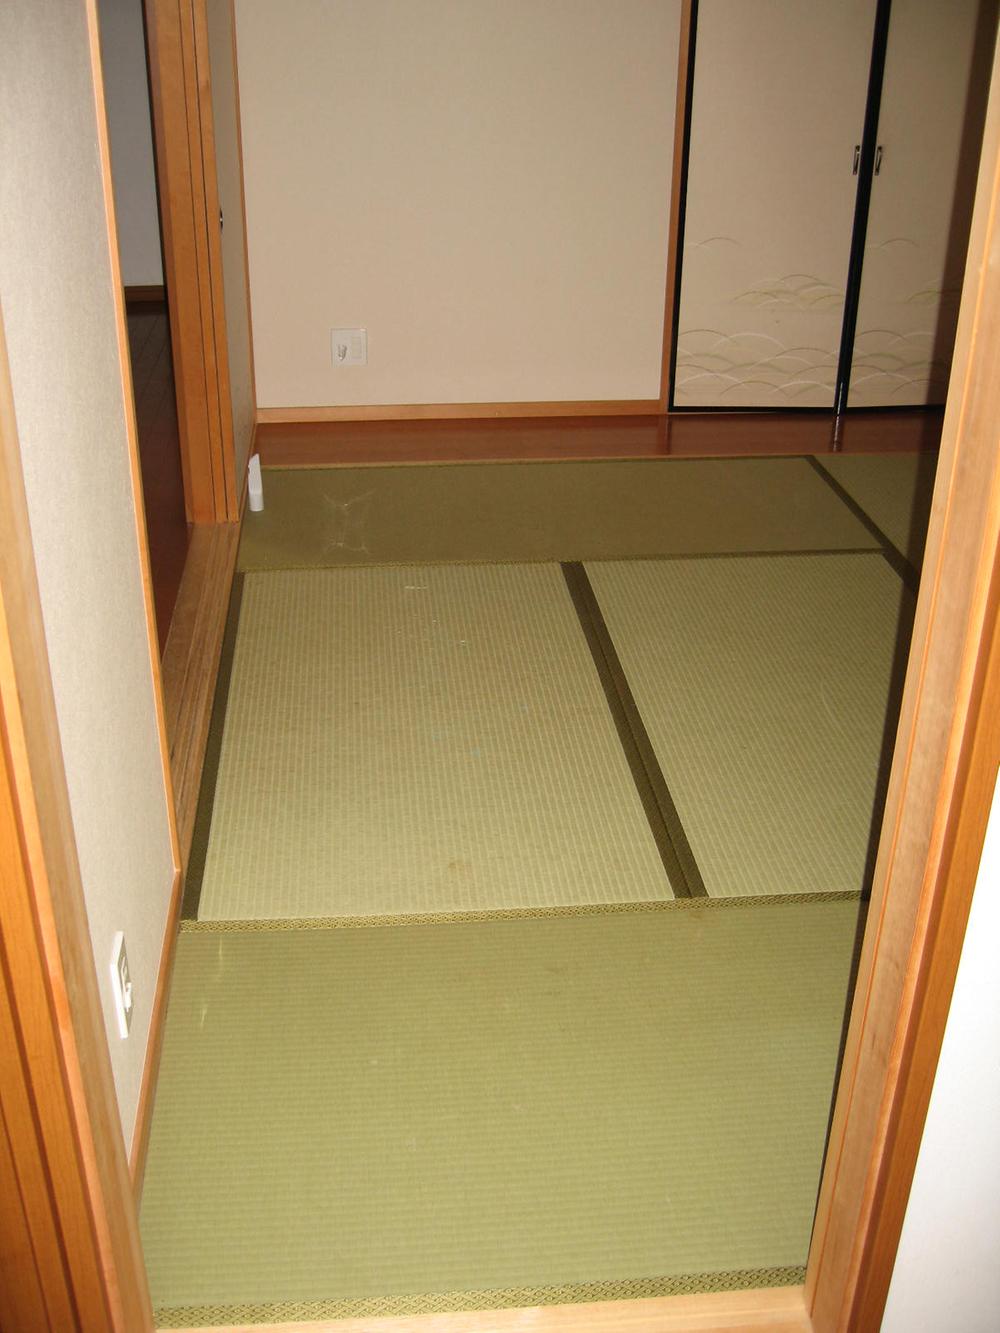 Other introspection. Indoor (11 May 2013) Shooting Japanese-style room also plates There is little